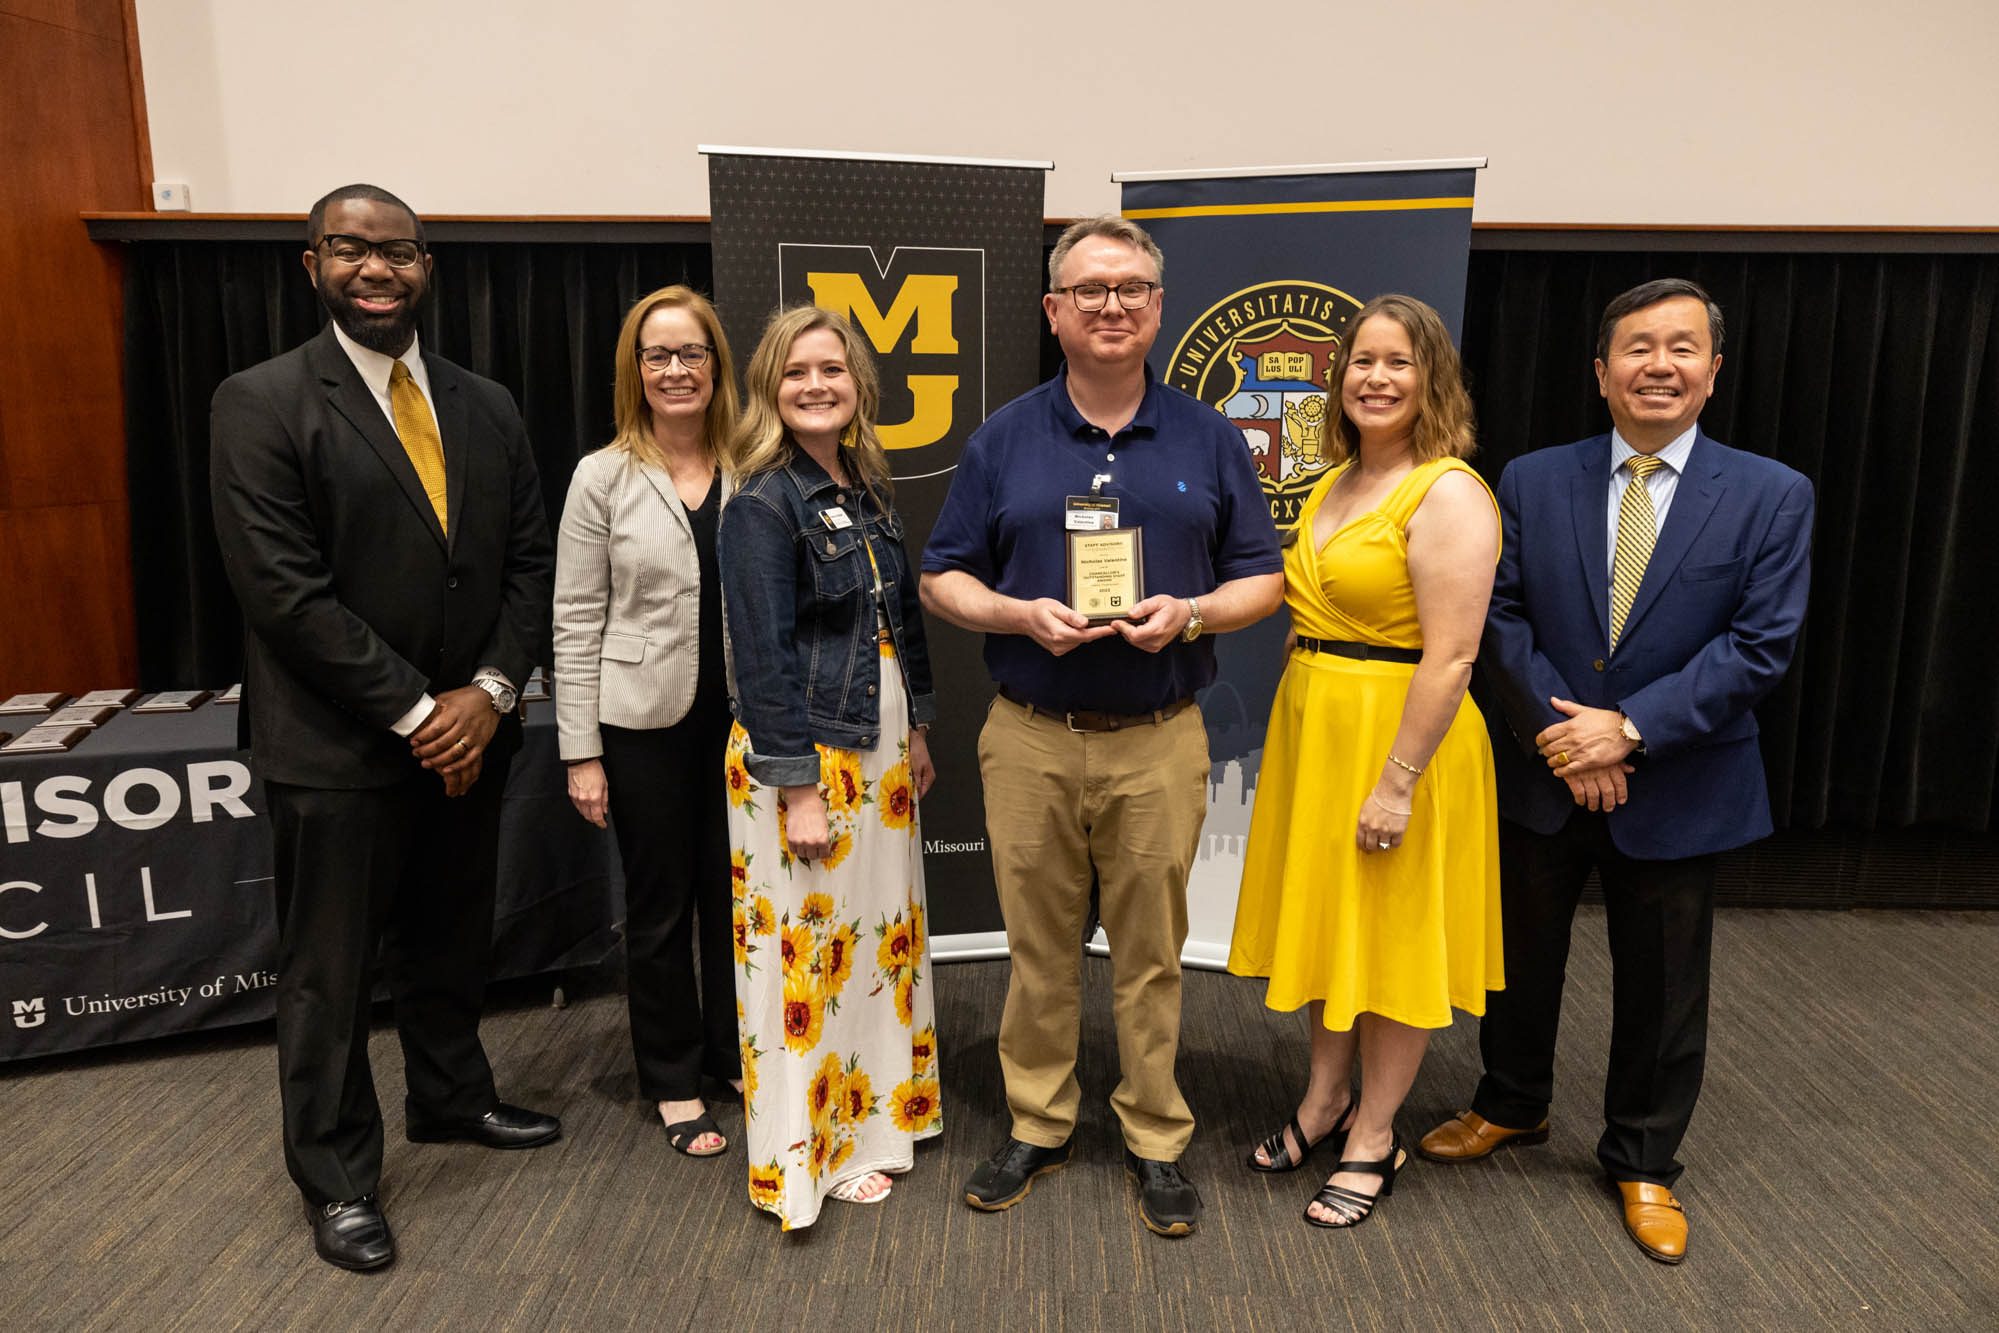 Chancellor’s Outstanding Staff Award – Technical/Paraprofessional: Nicholas Valentine – Customer Service and Support Services